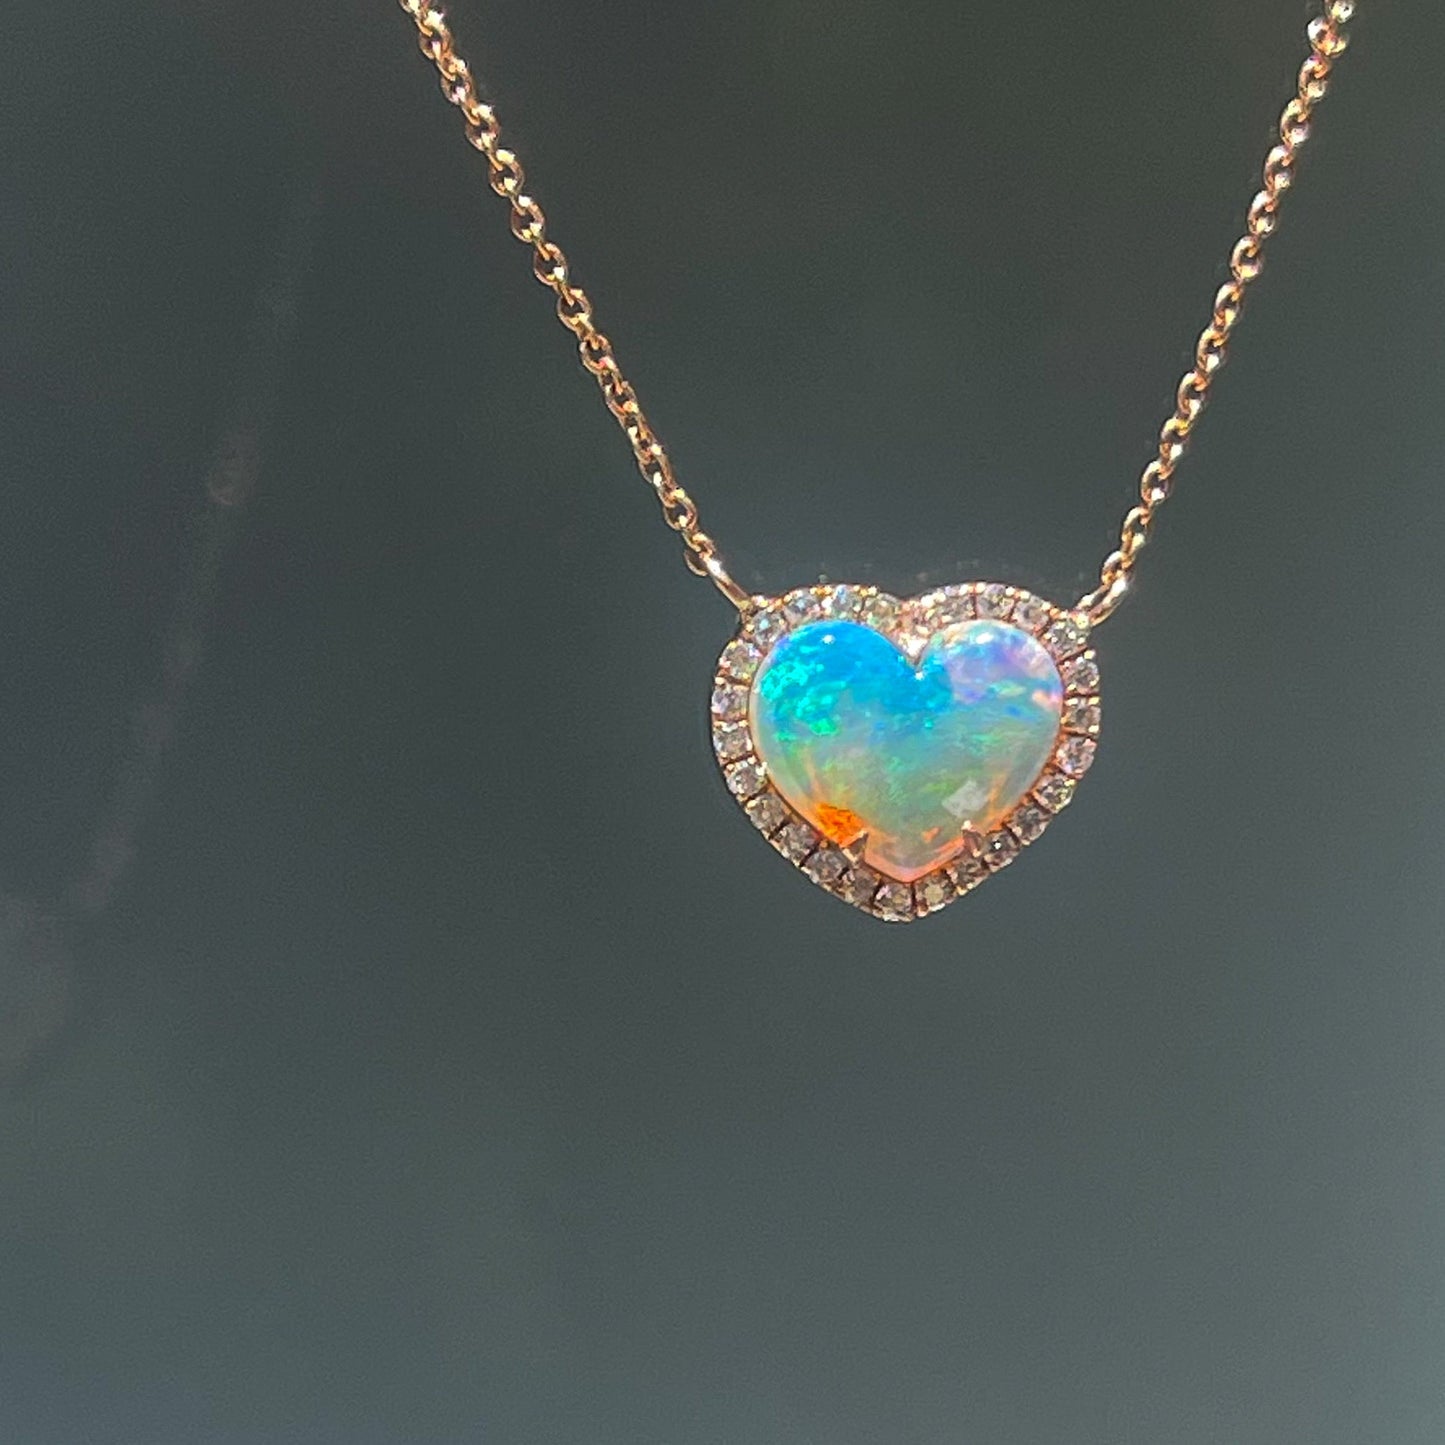 An Opal Heart Necklace by NIXIN Jewelry hangs in front of a frosted glass door. The opal pendant is made in 14k rose gold.